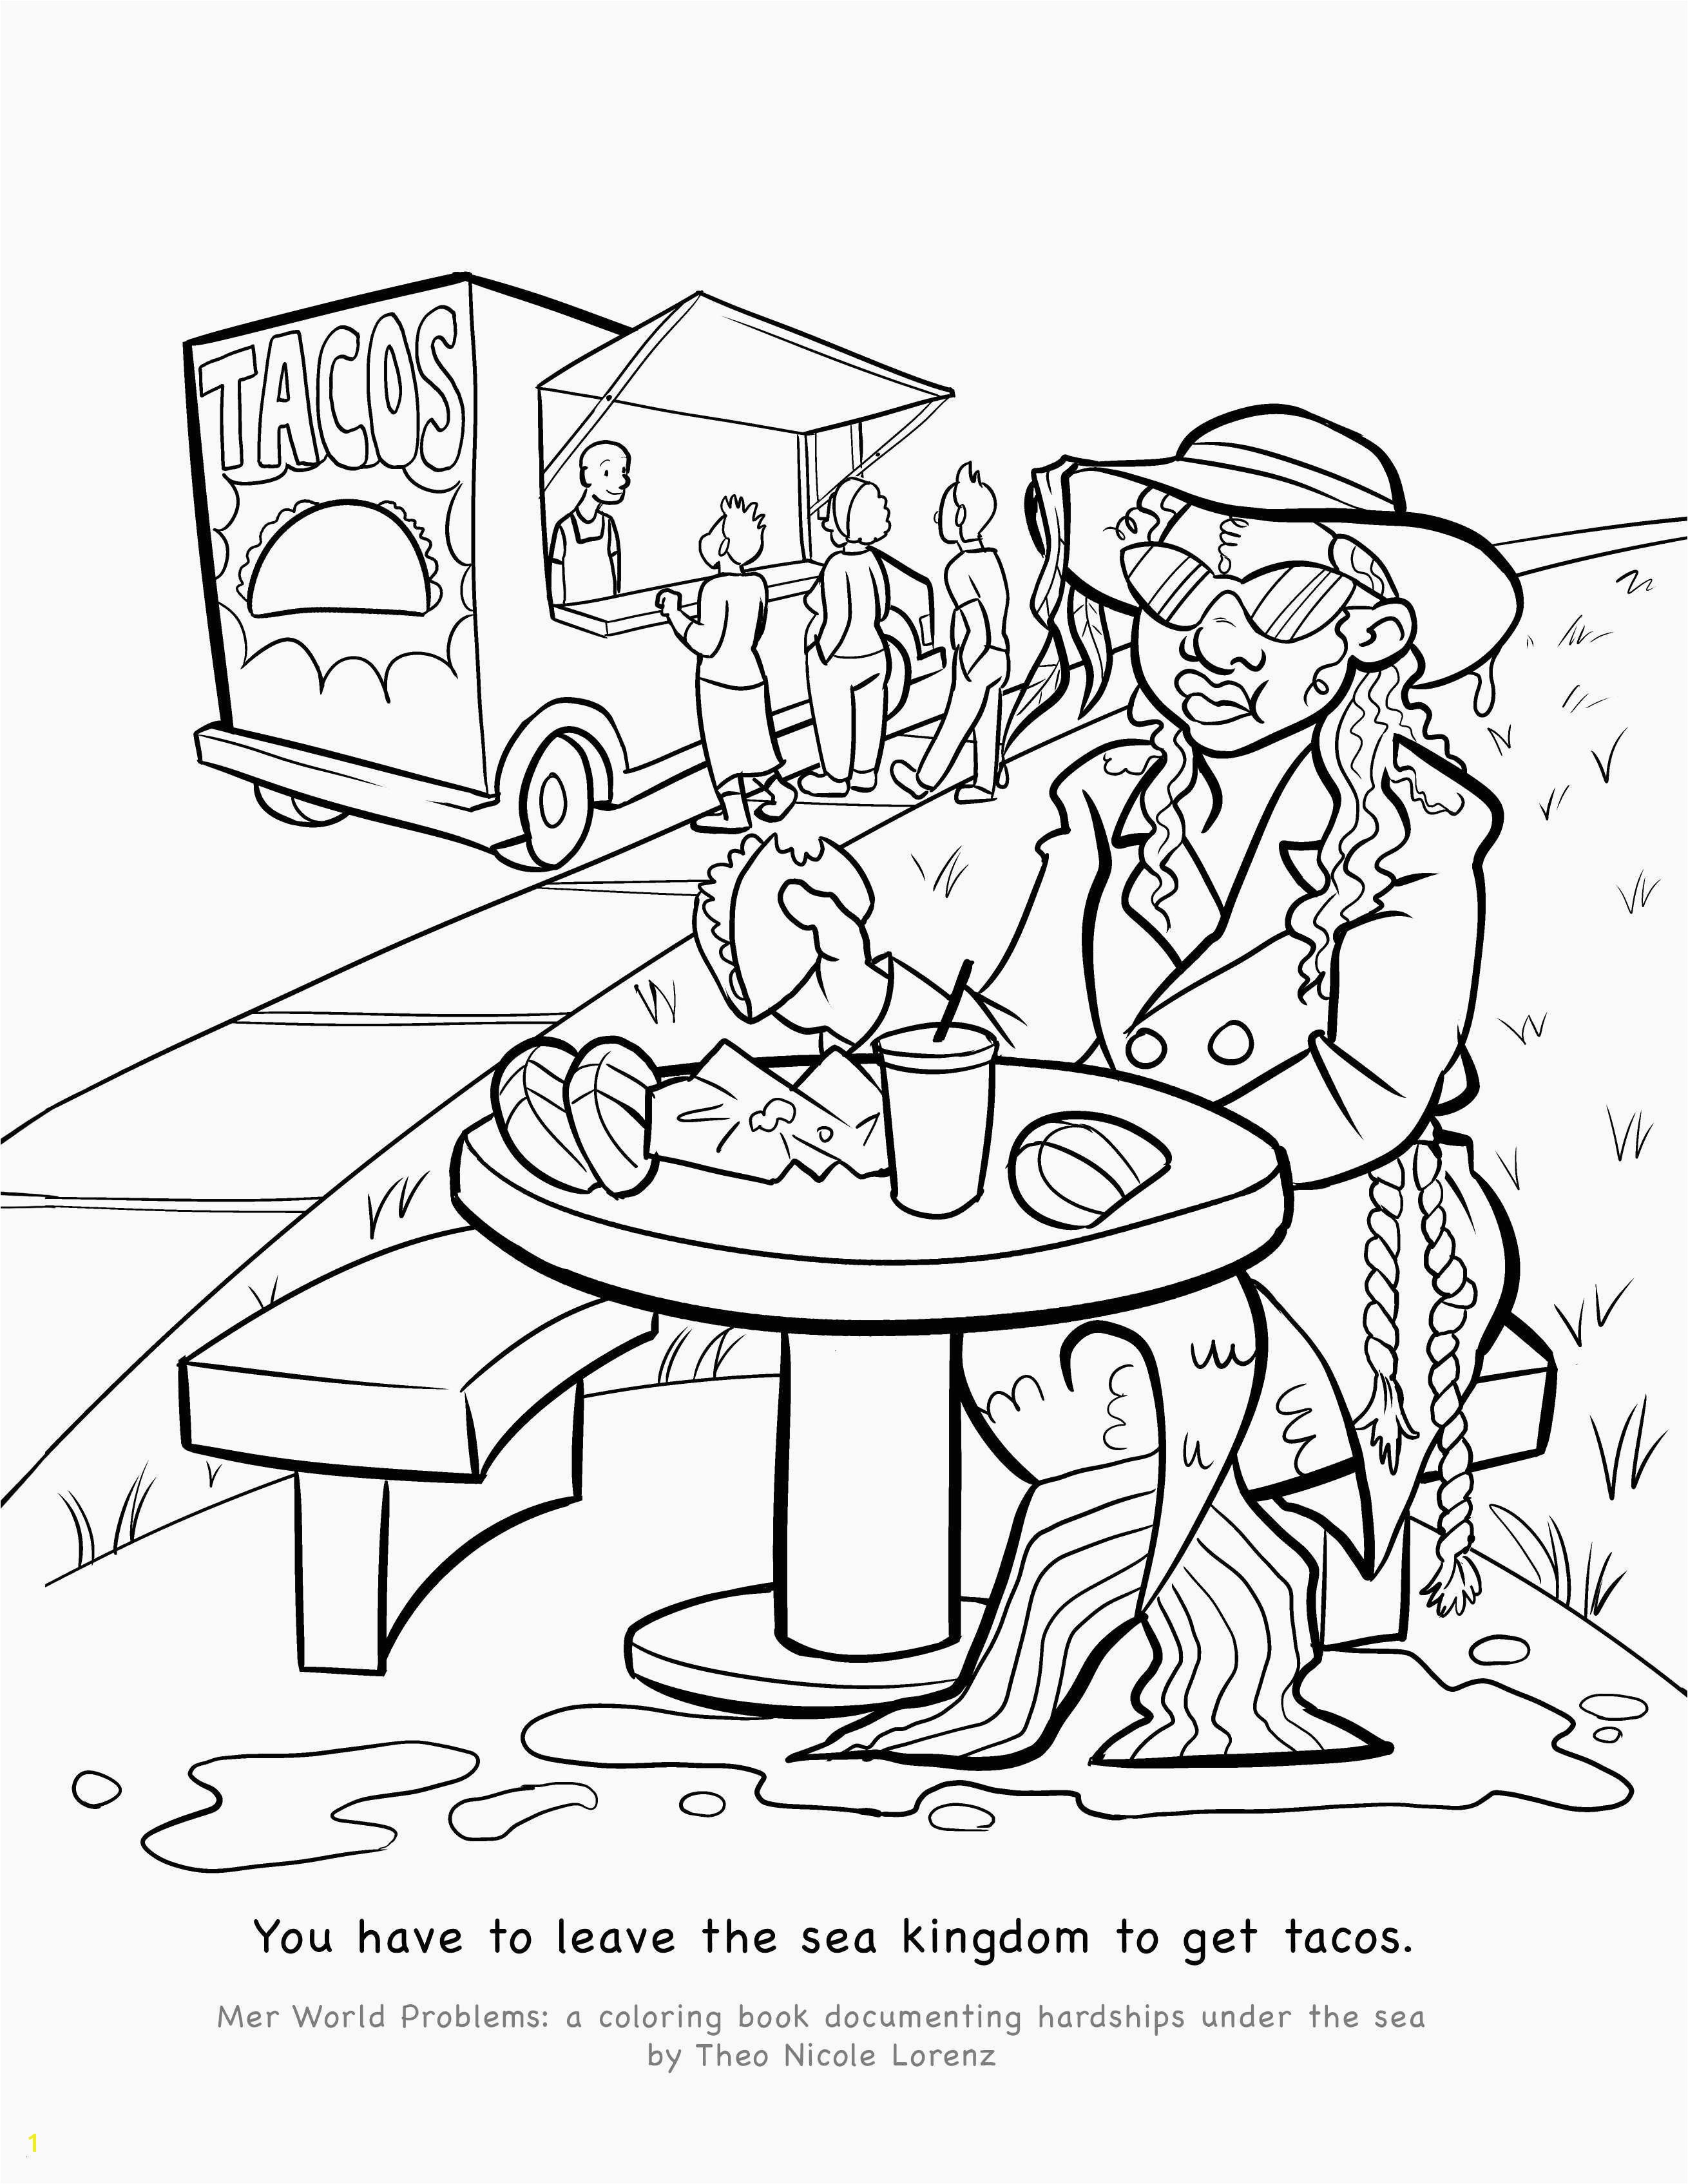 Free Coloring Printable Pages Best Coloring Pic Luxury Free Coloring Pages Elegant Crayola Pages 0d